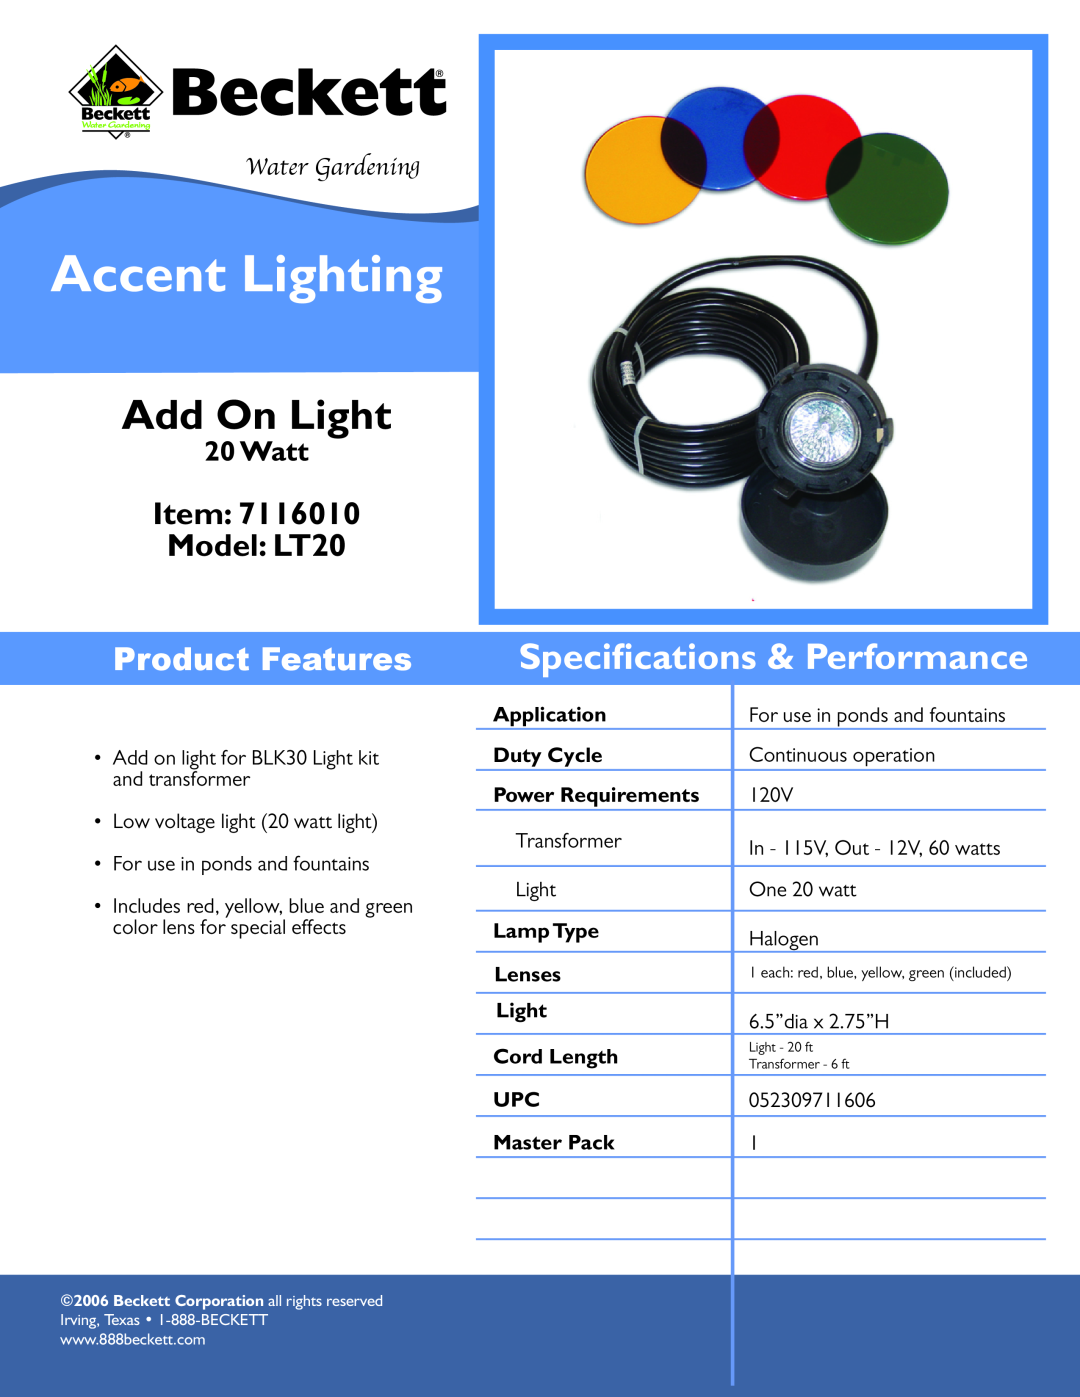 Beckett Water Gardening specifications Accent Lighting, Add On Light, Speciﬁcations & Performance, Item Model LT20 